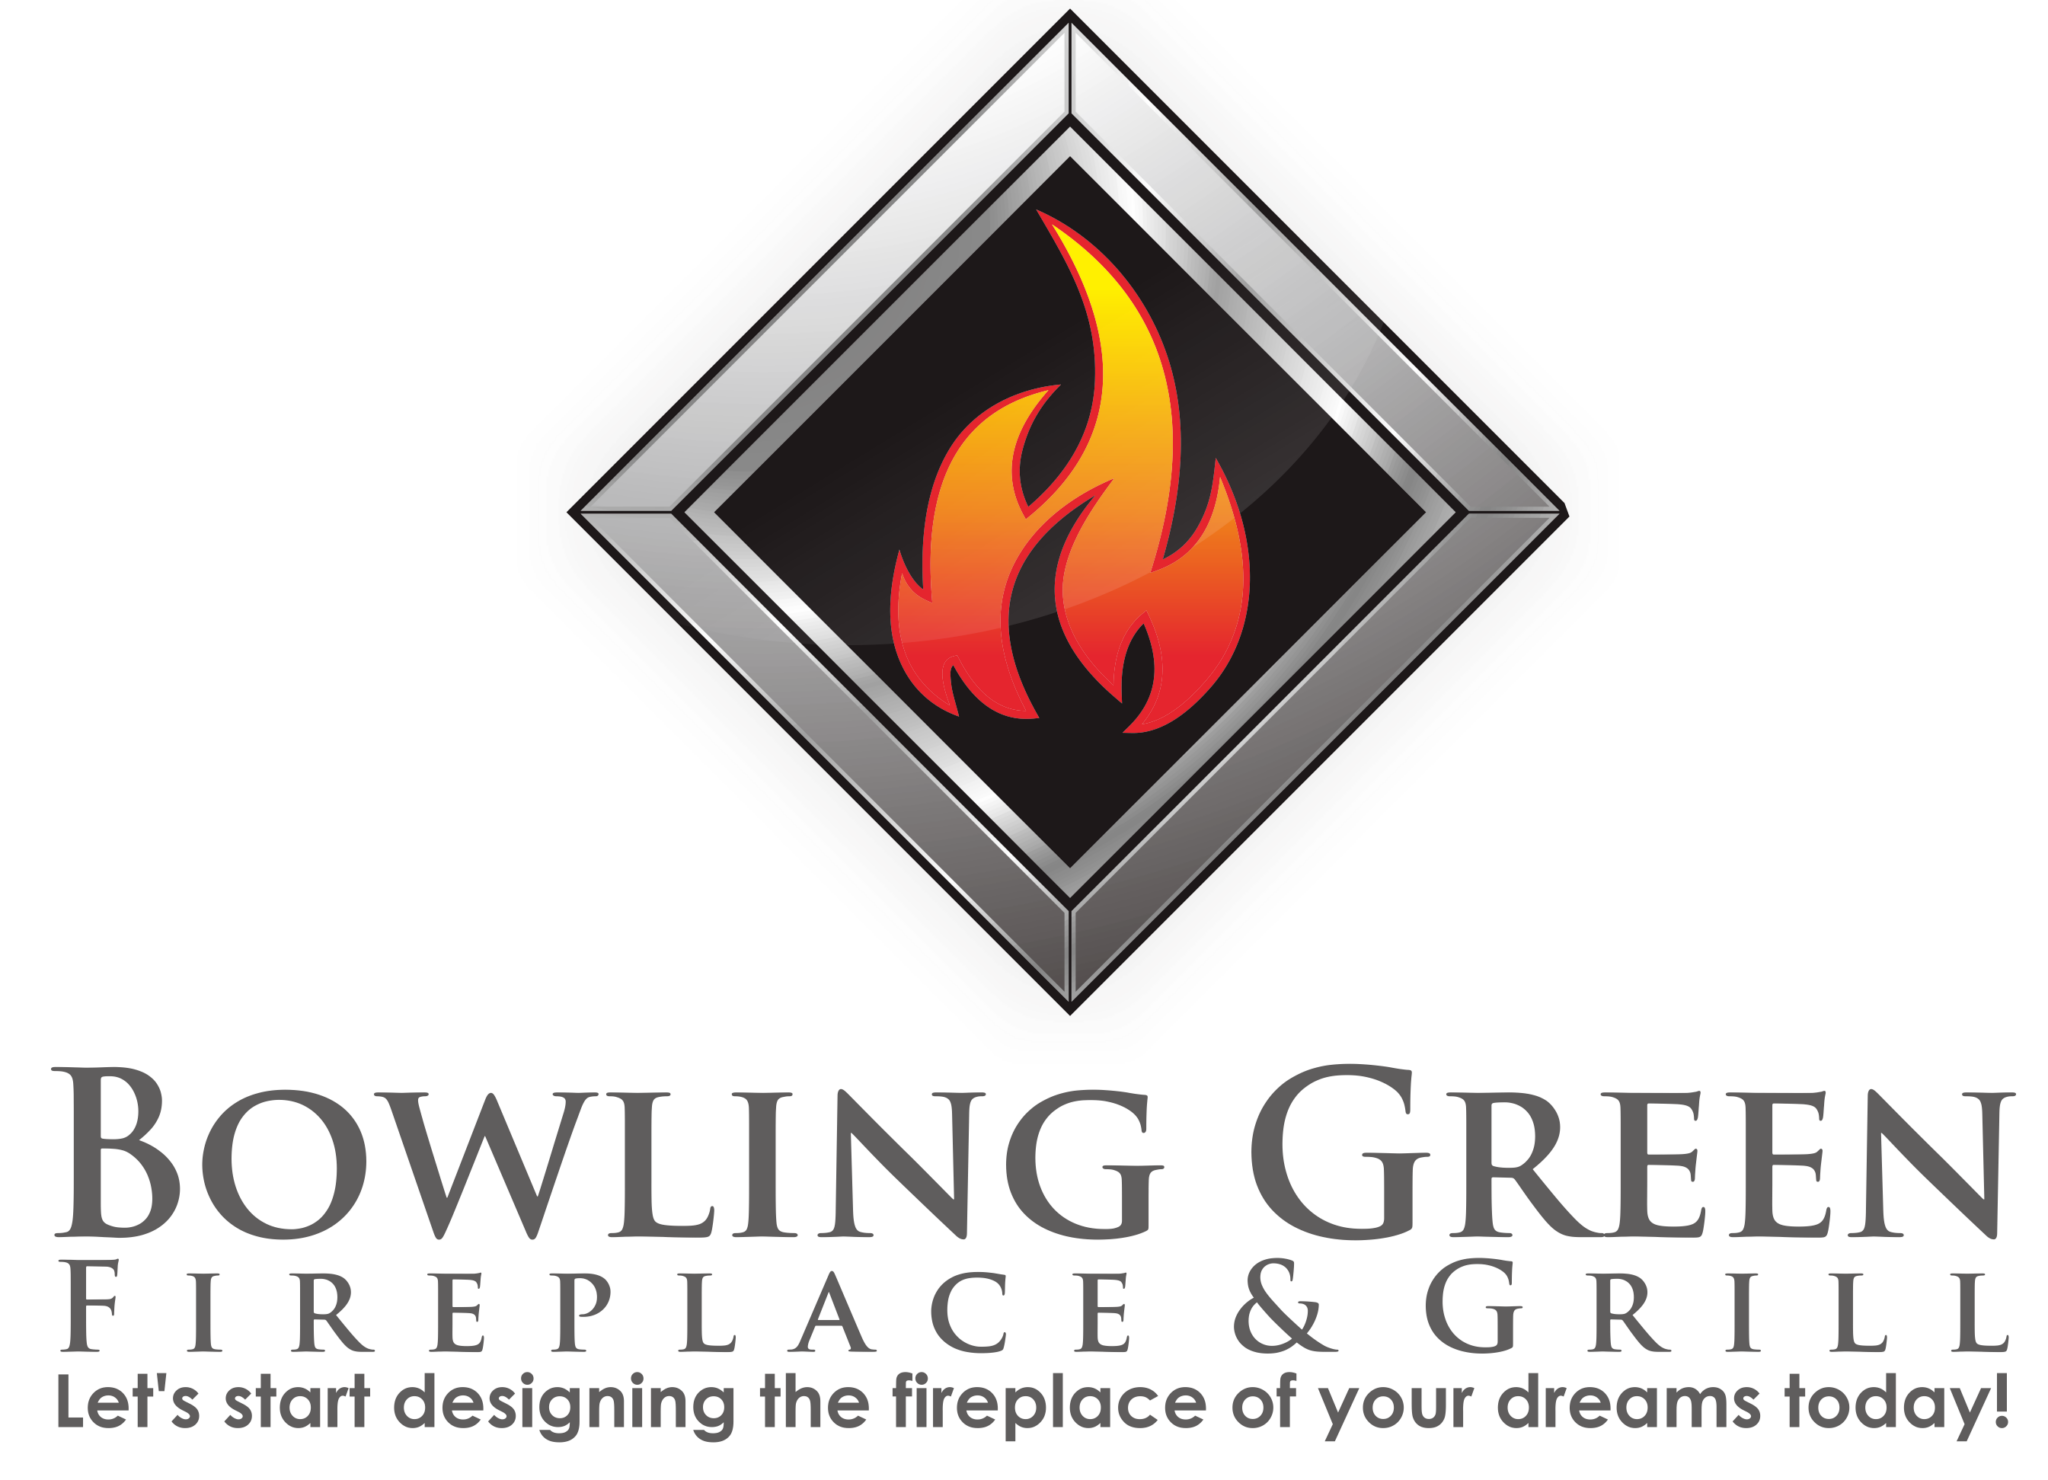 Fireplaces Bowling Green Fireplace & Grill